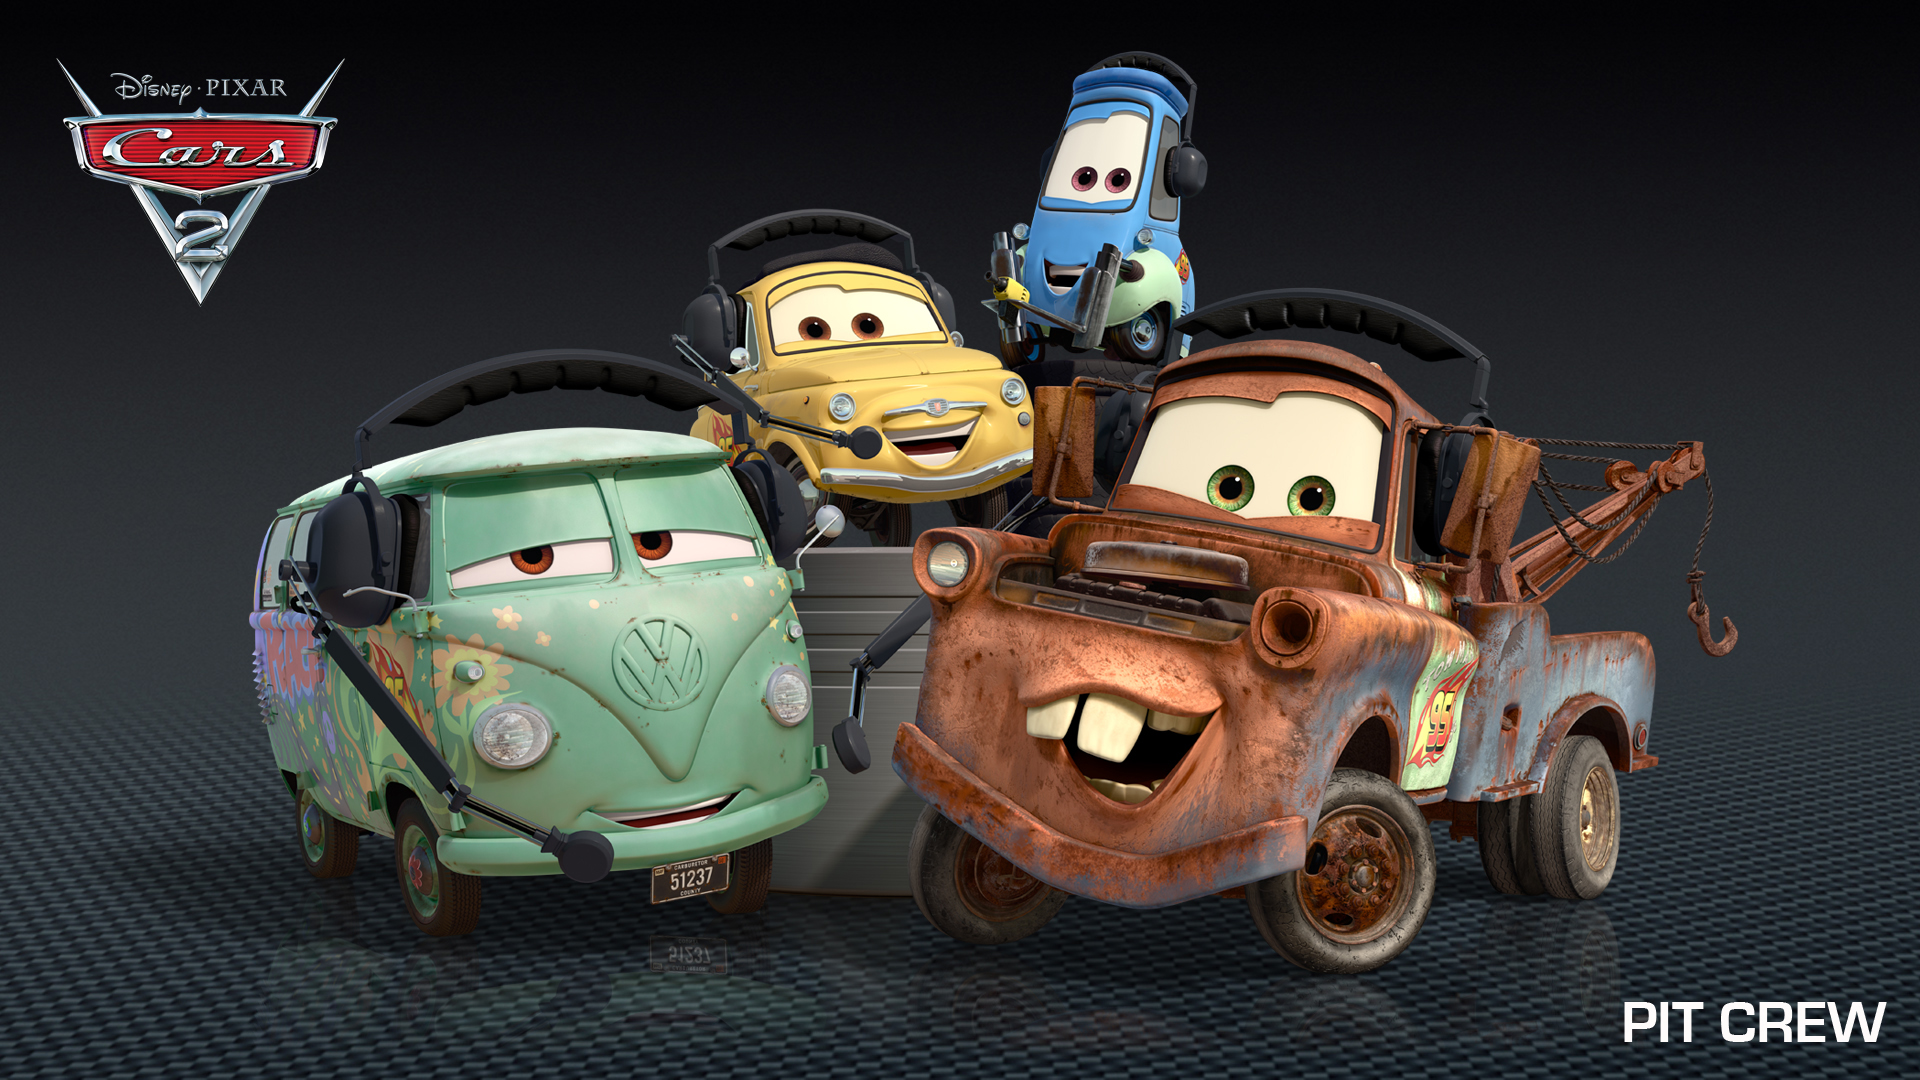 Cars 2 Characters Image & Descriptions Revealed + Lightning McQueen 3D Turnaround Video